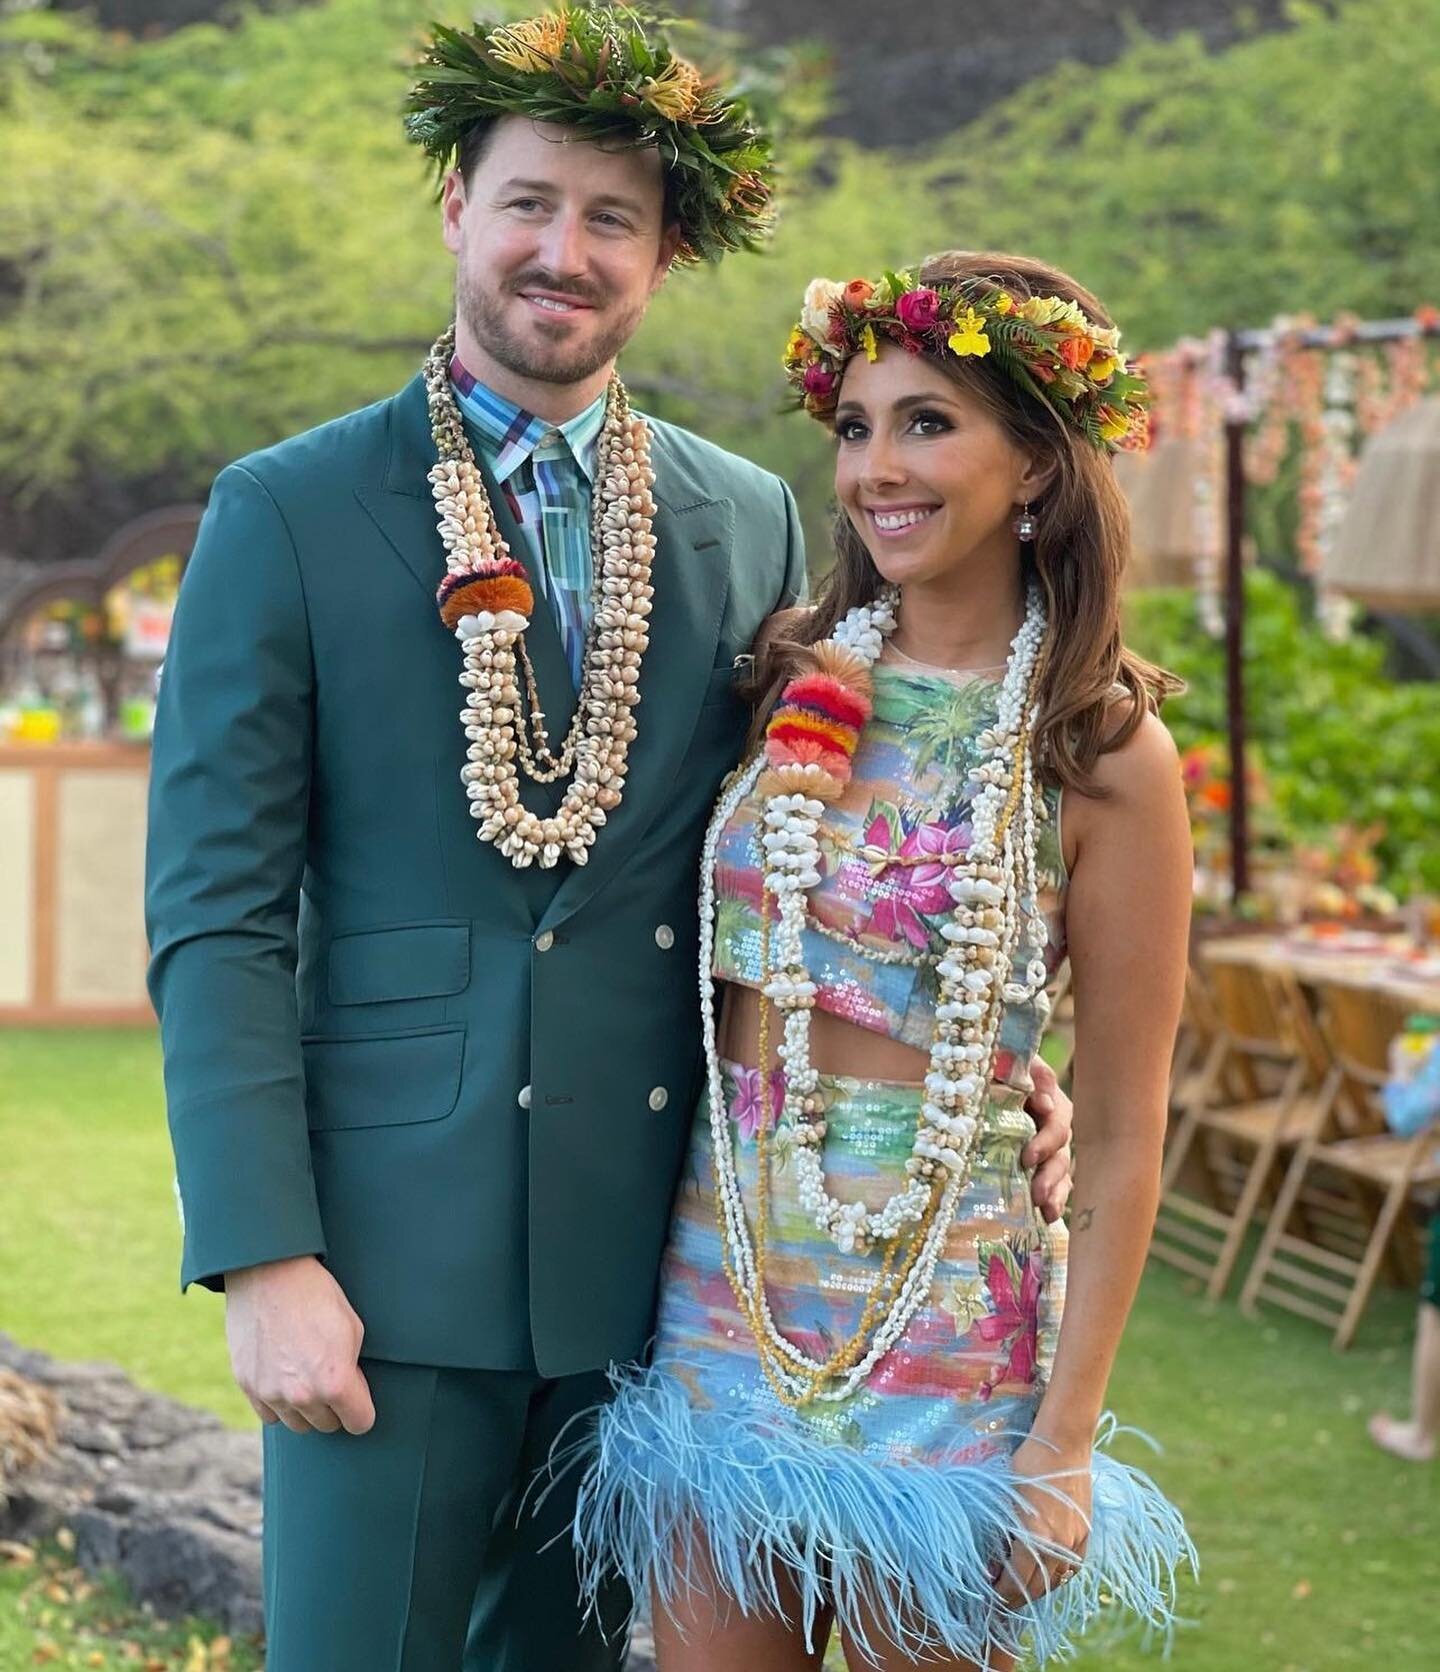 In Hawai&rsquo;i, May 1st is lei day&mdash; a celebration of flower lei as a symbol of love and friendship 🌸 Bailey + Peter shared the spirit of Aloha with their guests welcoming them to @fshualalai with @live_a_lei_life shell lei and colorful orchi